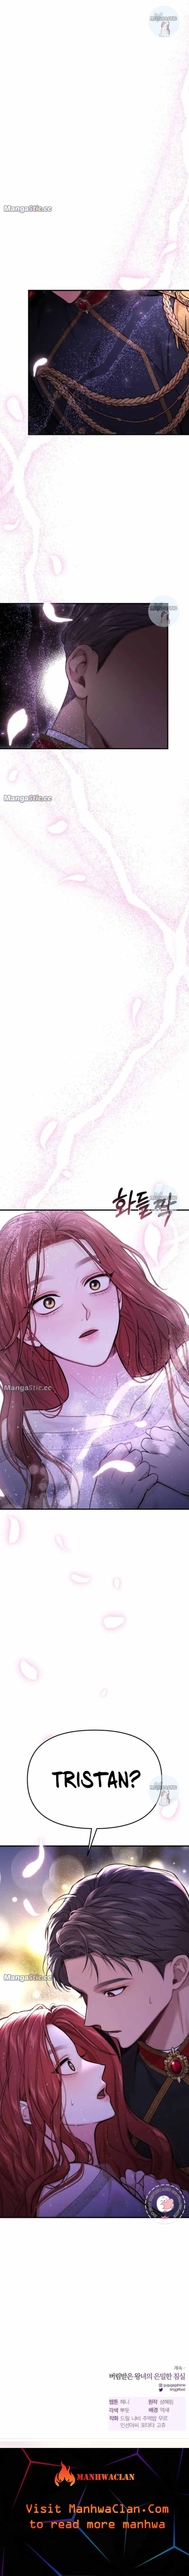 The Secret Bedroom of a Dejected Royal Daughter chapter 64